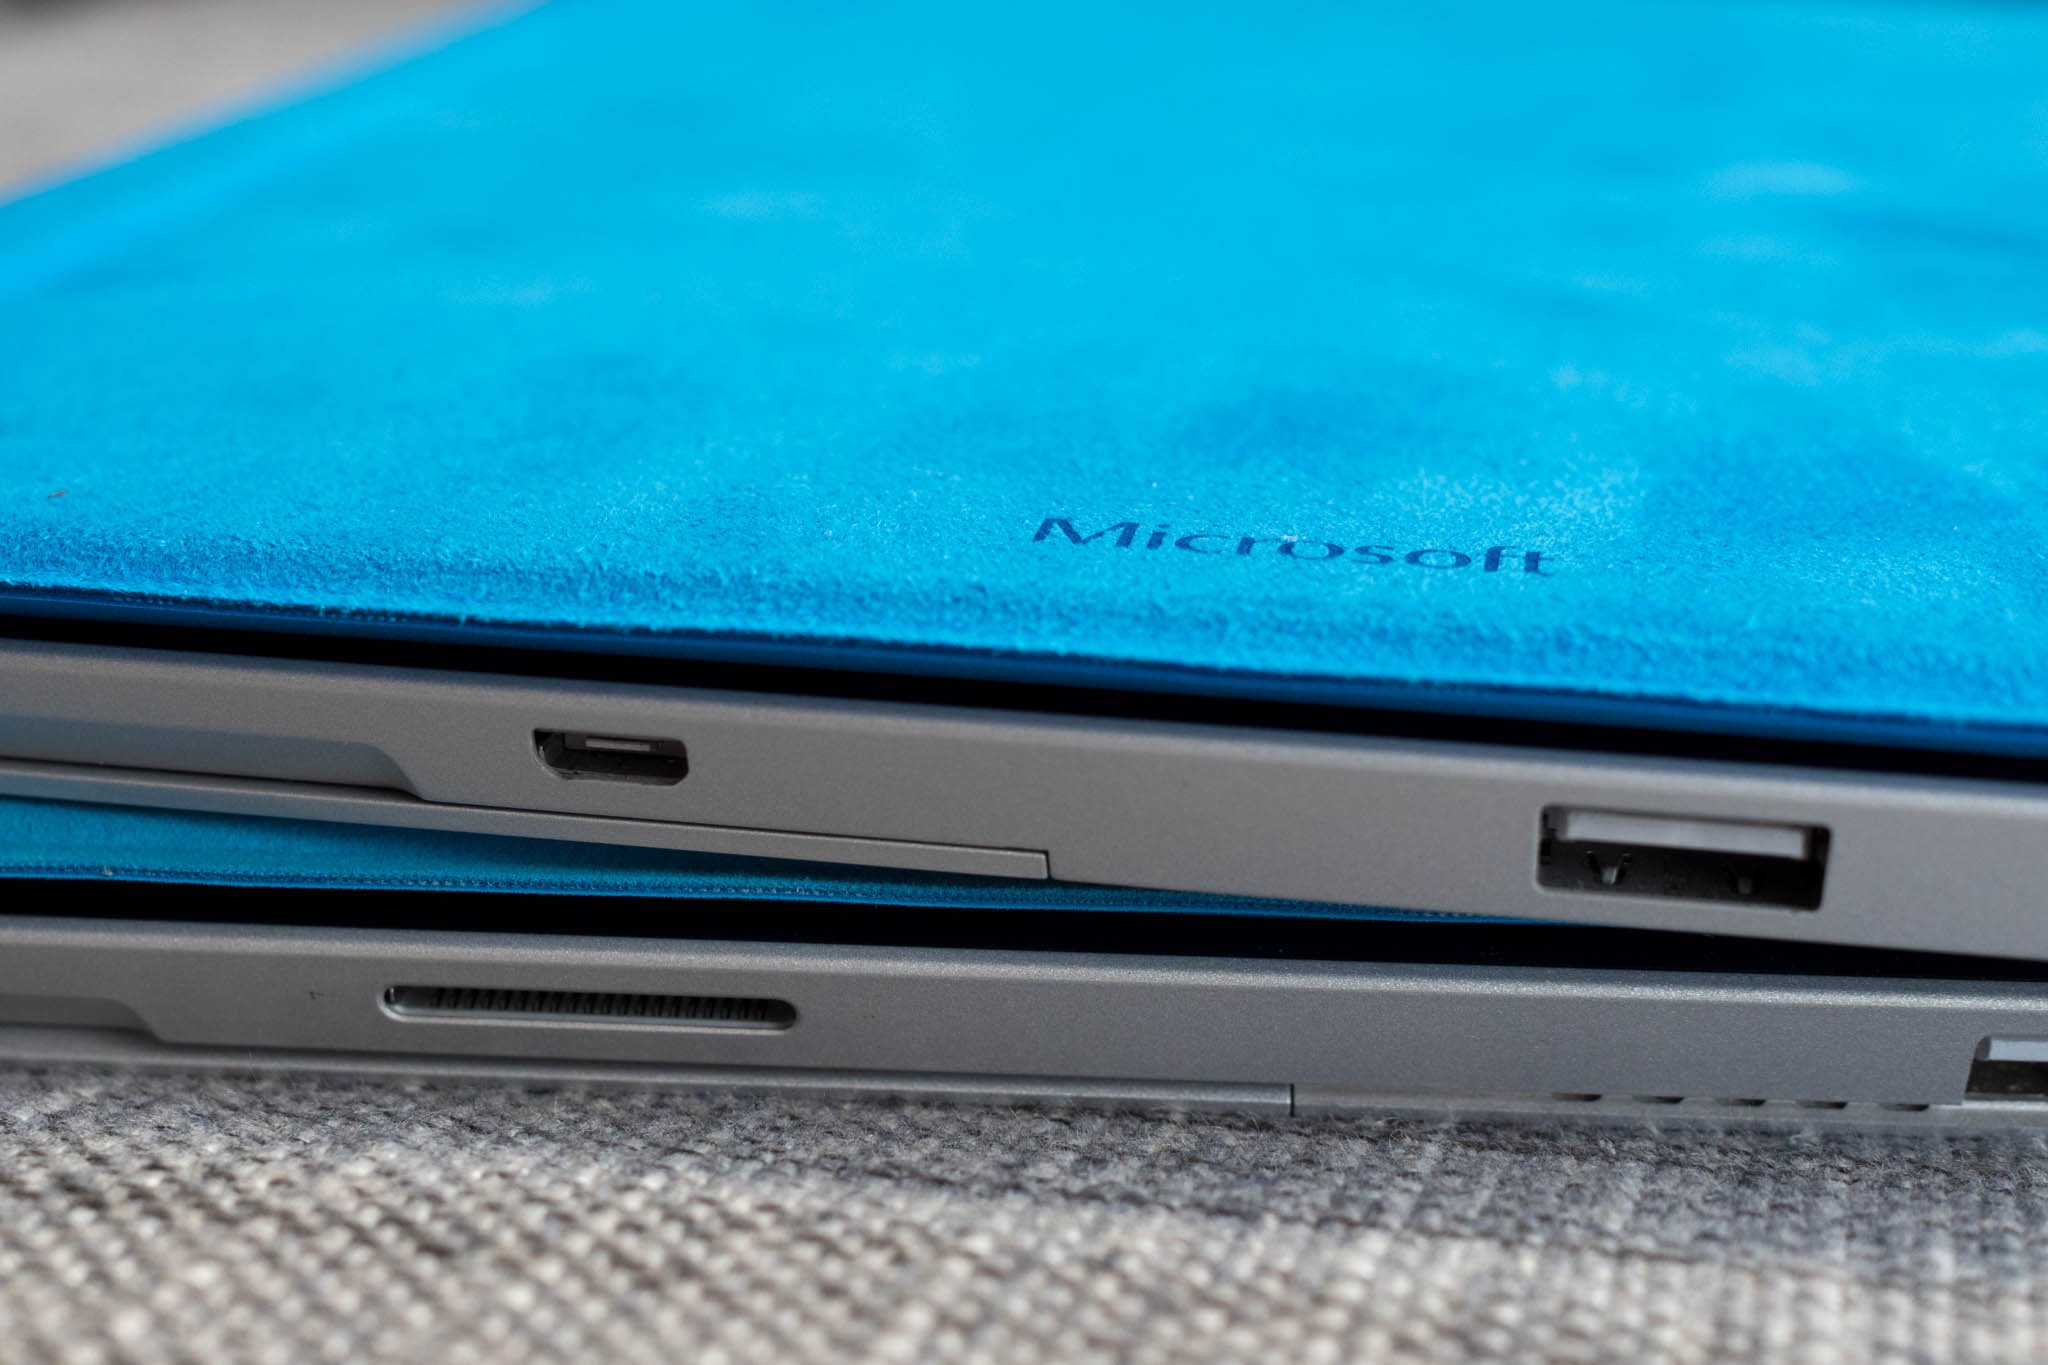 Surface 3 and Surface Pro 3